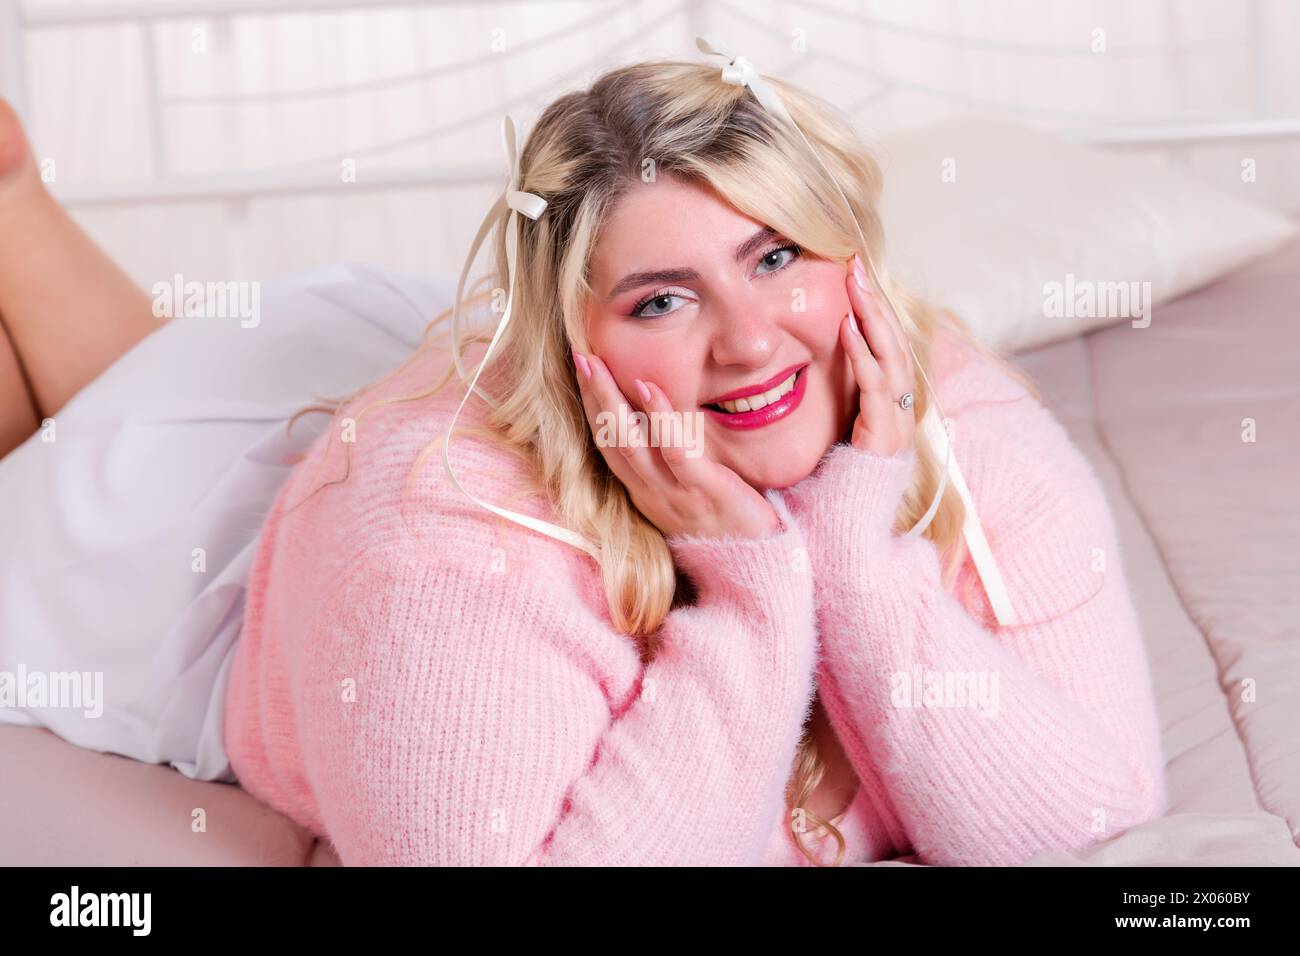 Smiling plus size young lady wearing casual outfit relaxing on comfortable bed with hands on chin and looking at camera in bright room Stock Photo